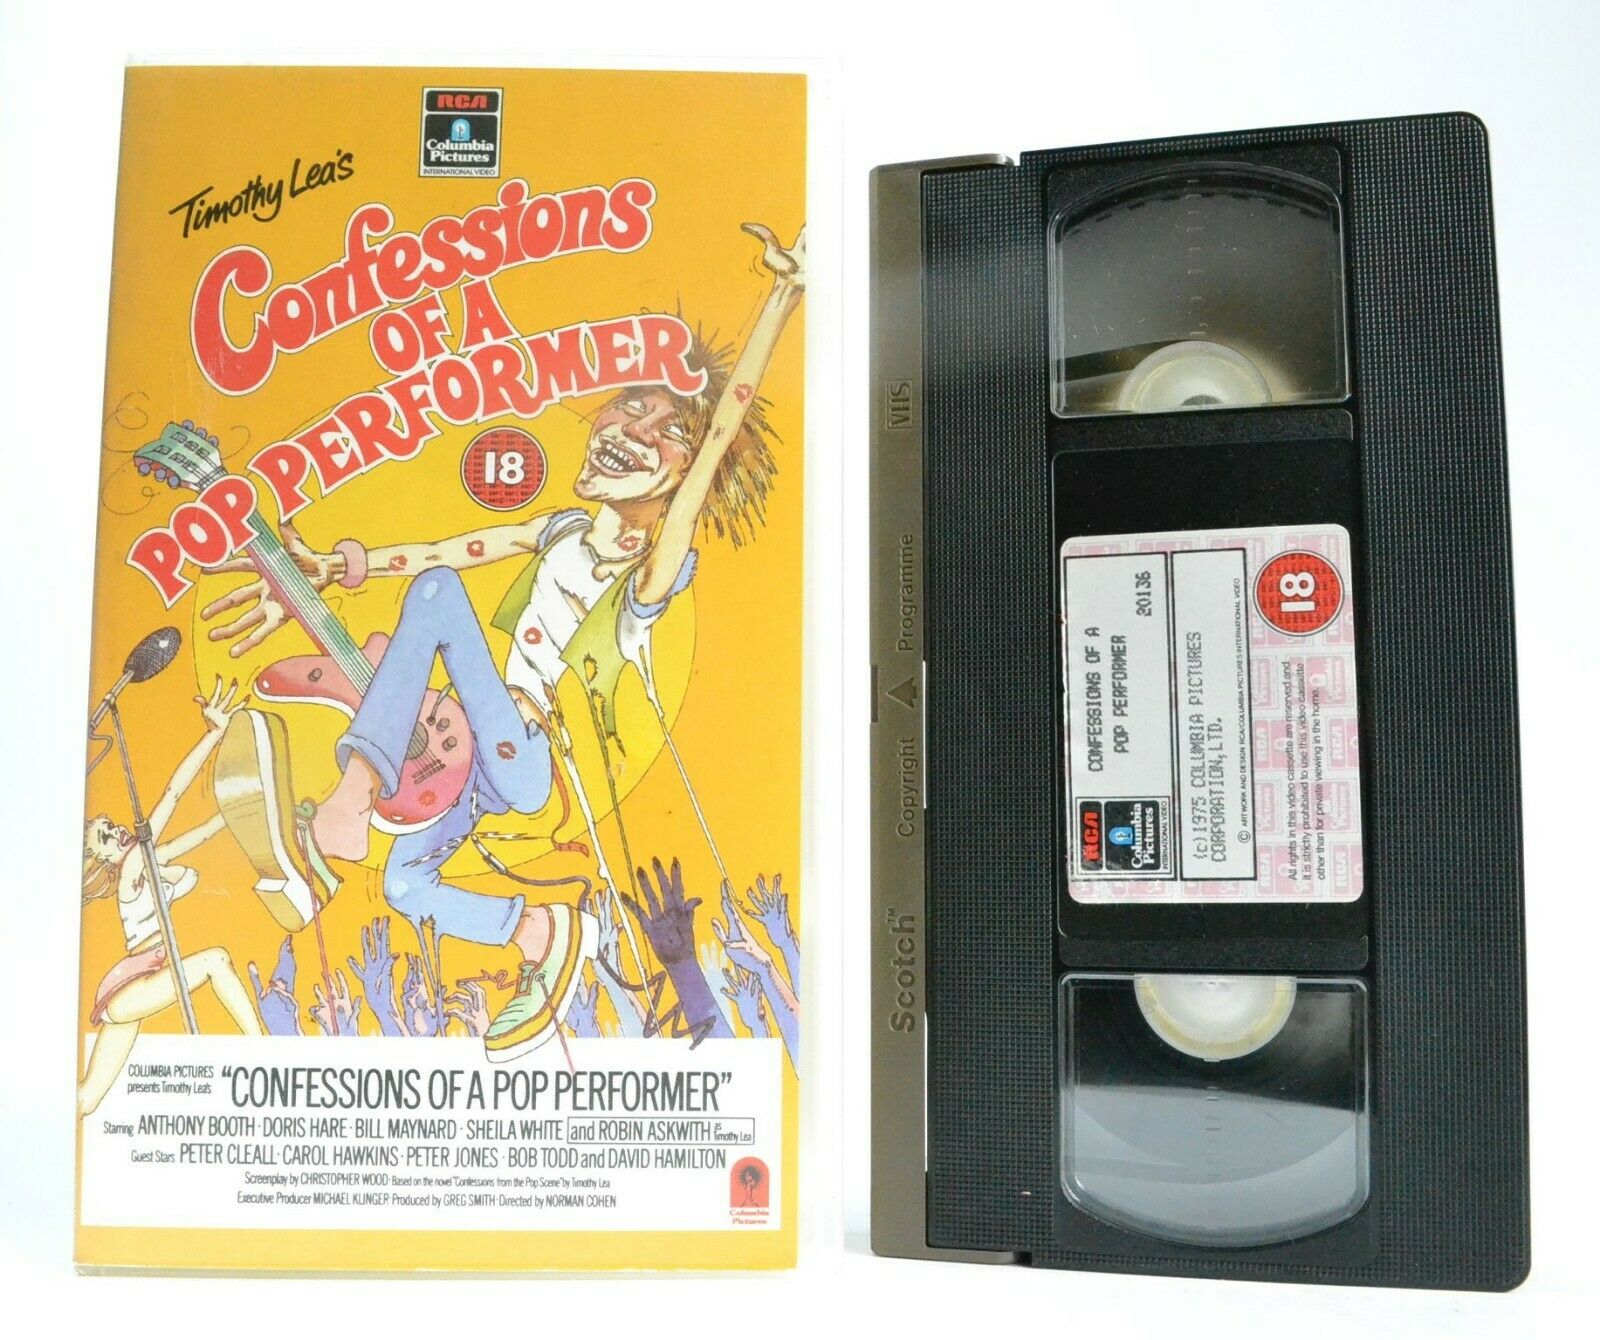 Confessions Of A Pop Performer (1975) - Adult Comedy -<<Timothy Lea>>- Pal VHS-